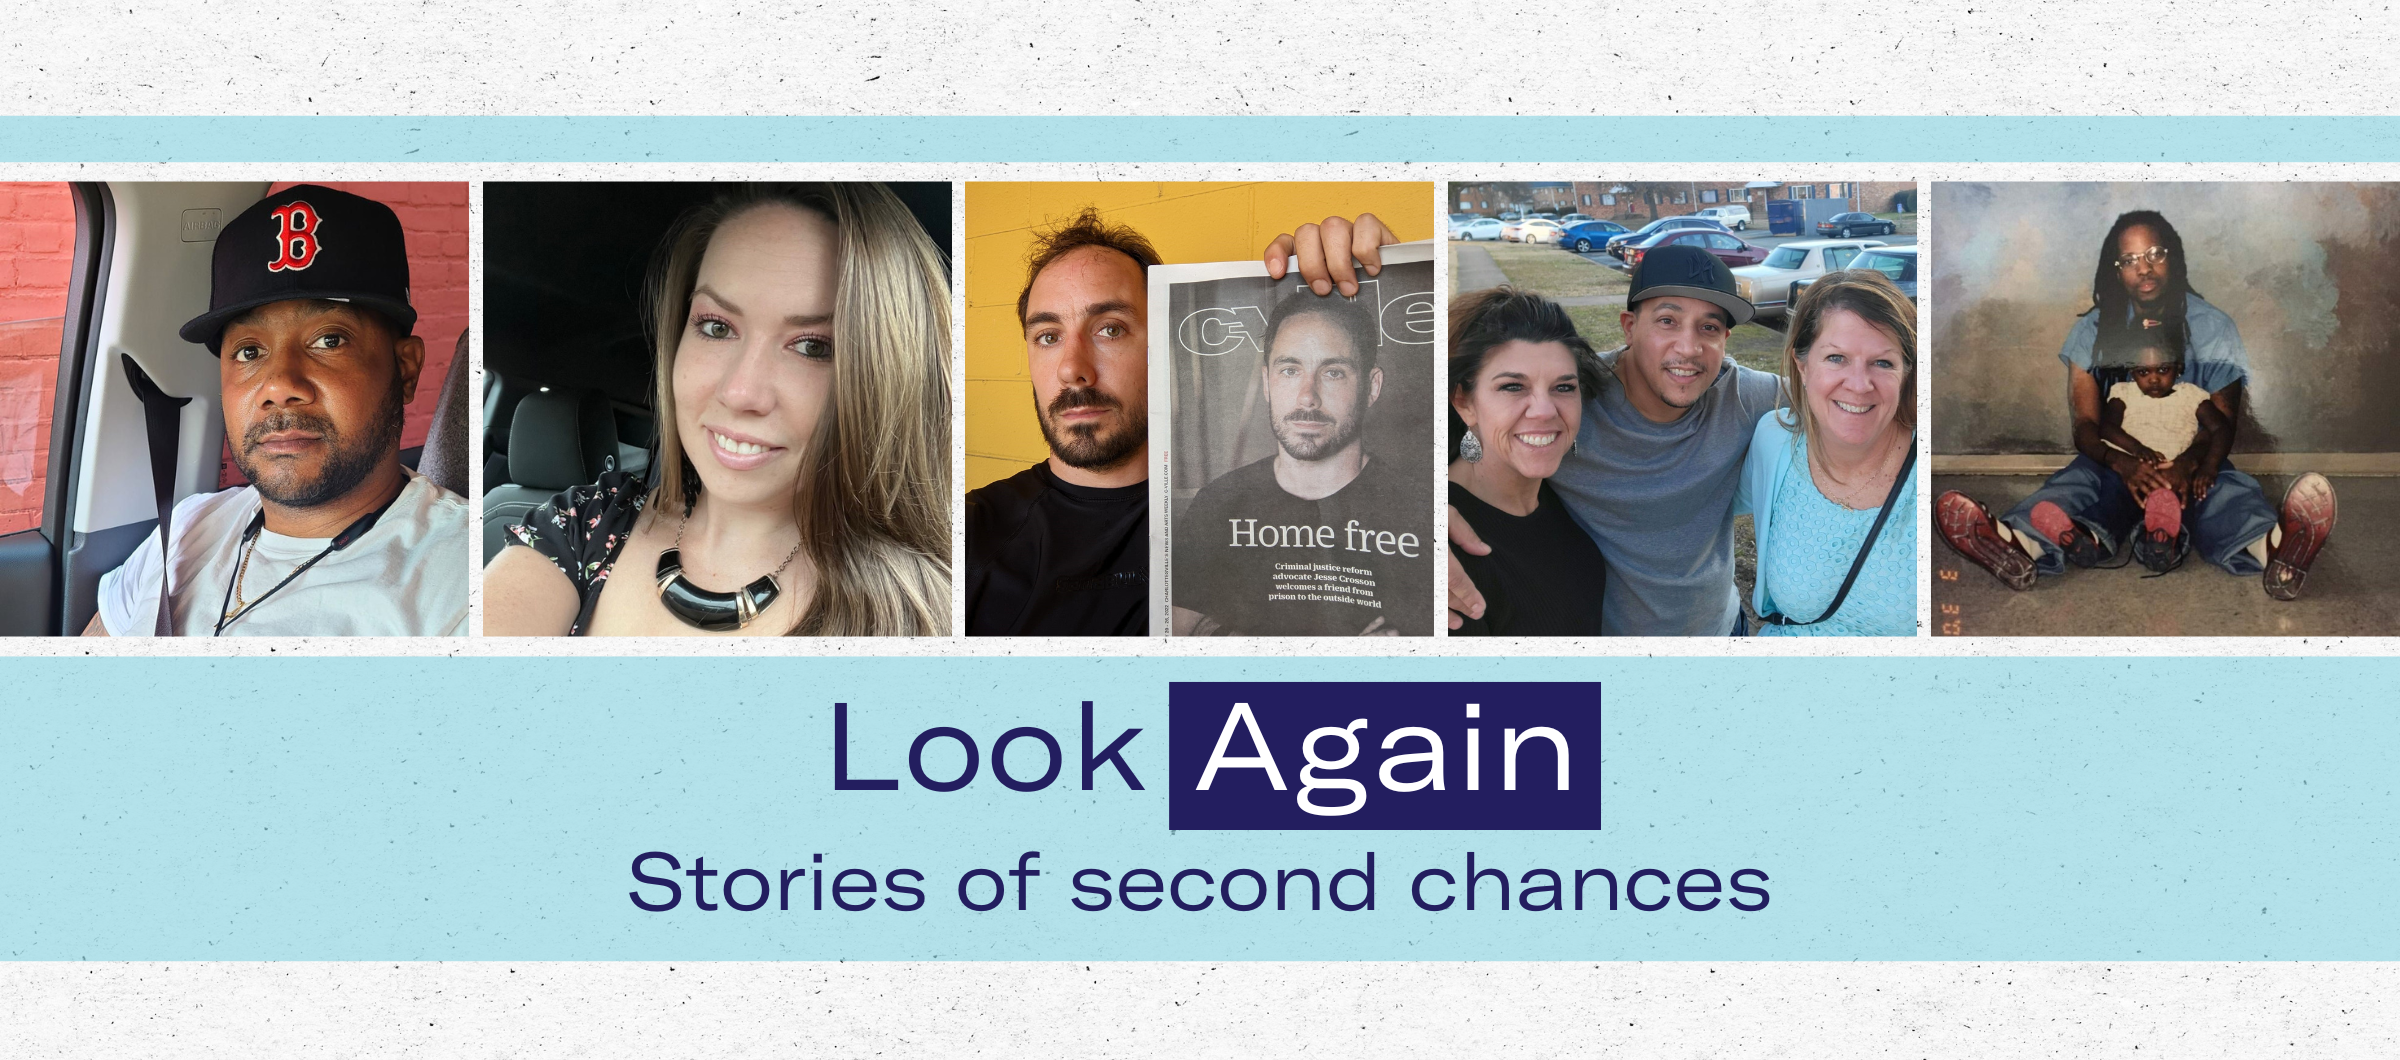 banner with photos of people featured in this storytelling series about second chances. Below the photos is the text "Look Again: Stories of second chances"